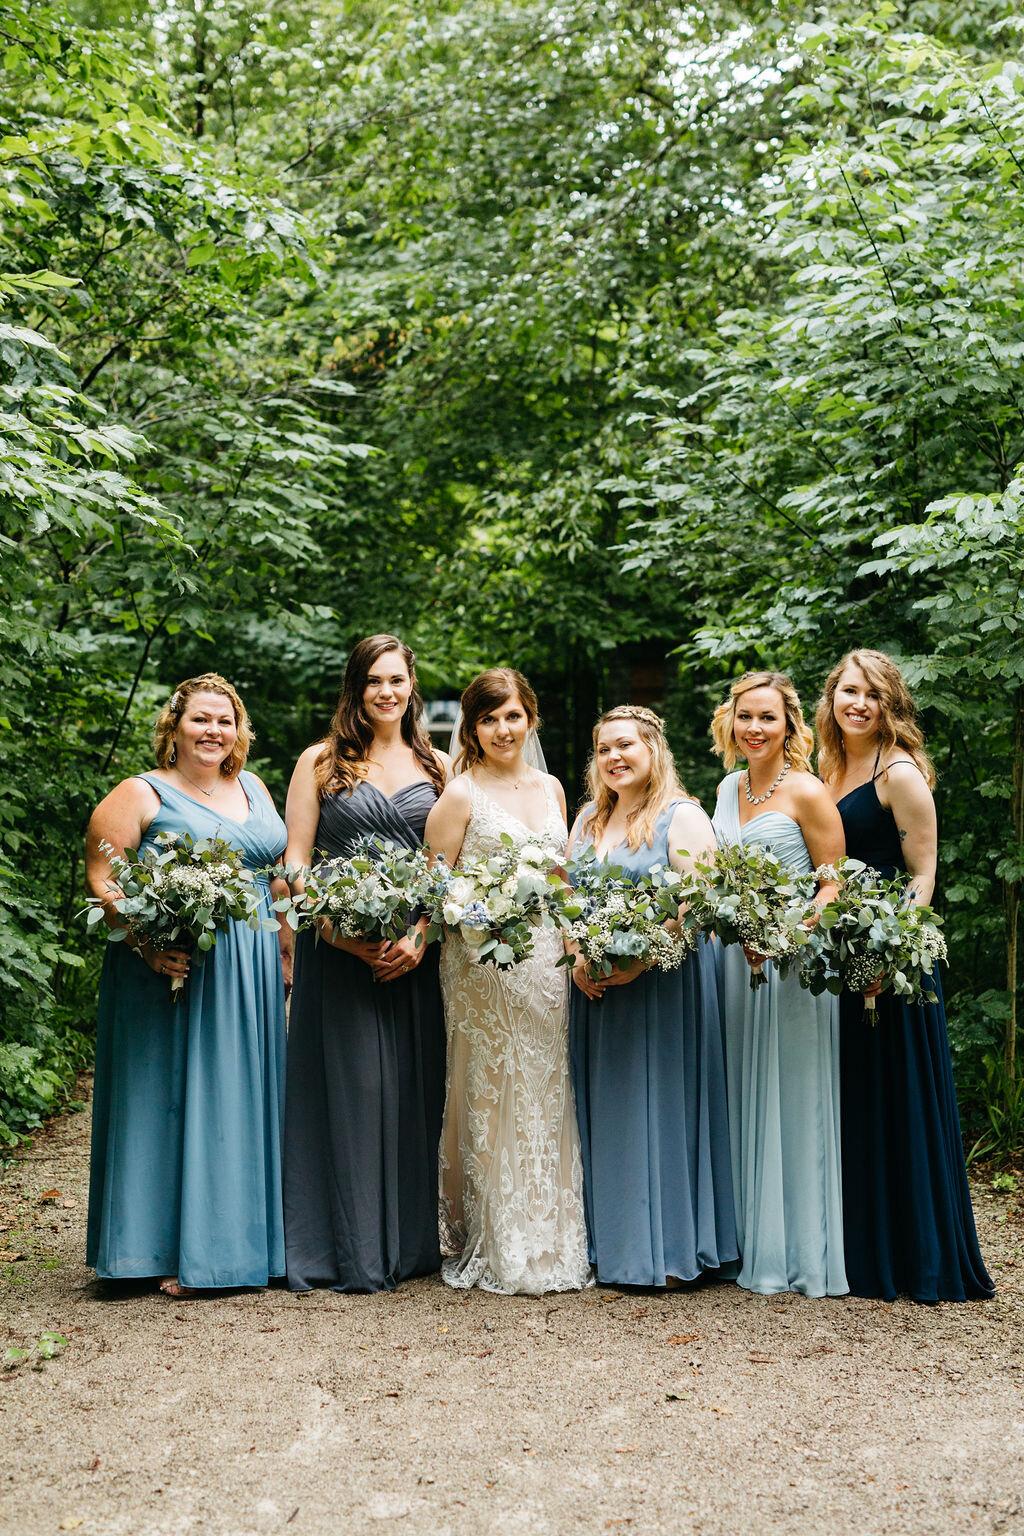 Hexagonal Wedding Arch at Krippendorf Lodge — Carly Messmer Floral Design